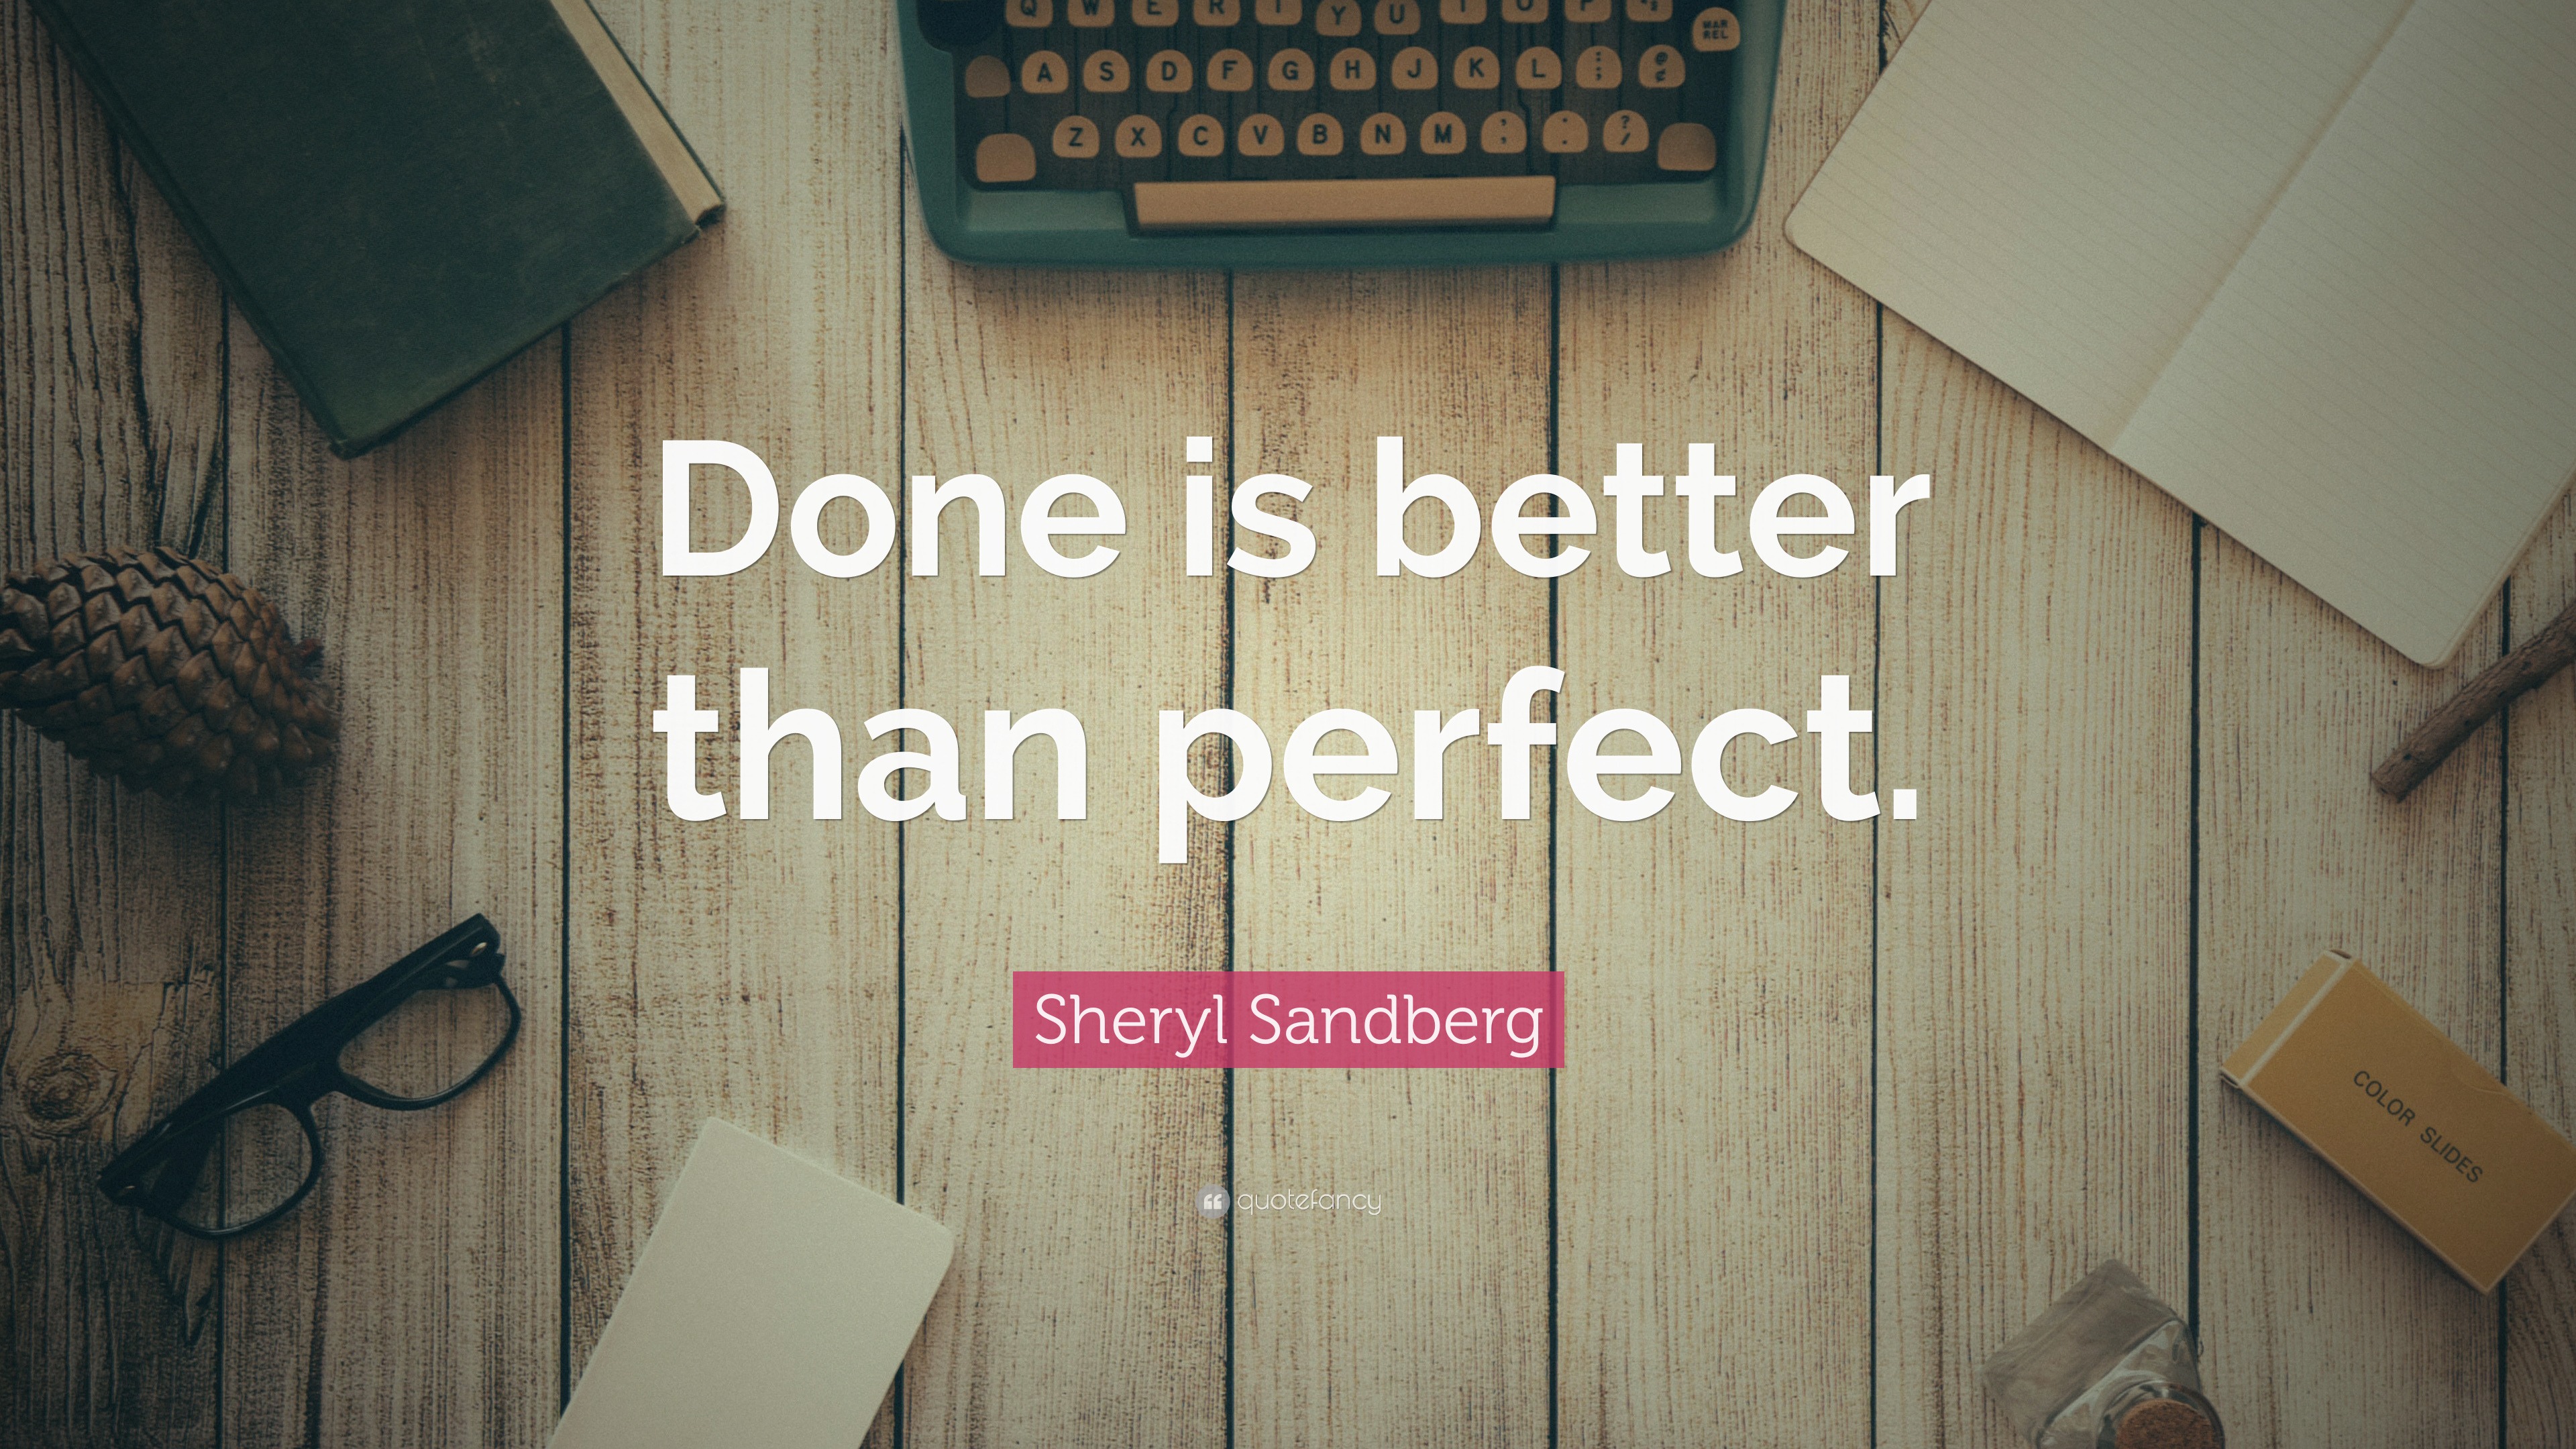 Sheryl Sandberg Quote: “Done is better than perfect.” (23 wallpapers) - Quotefancy